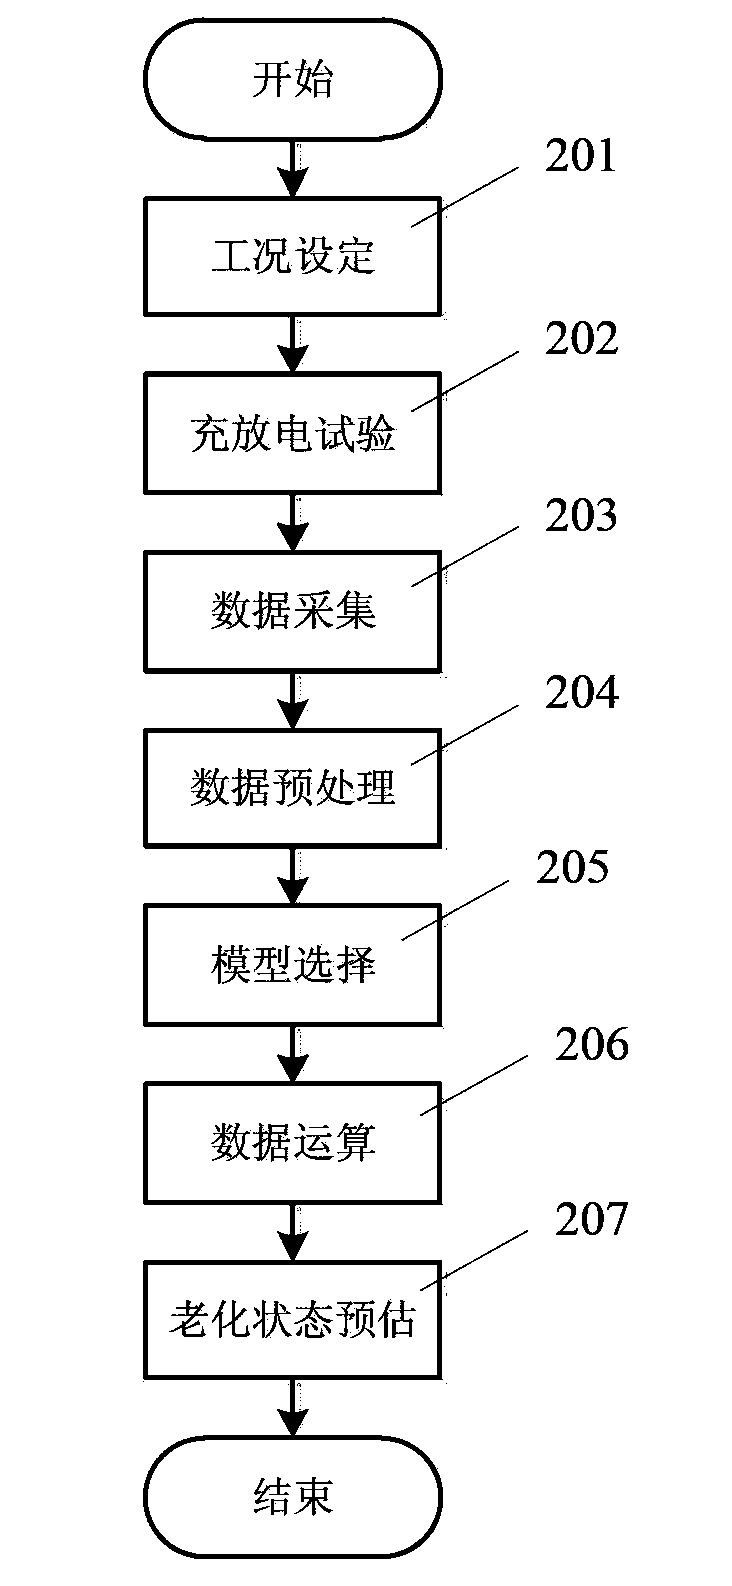 Super capacitor-based aging state estimation detection system and method